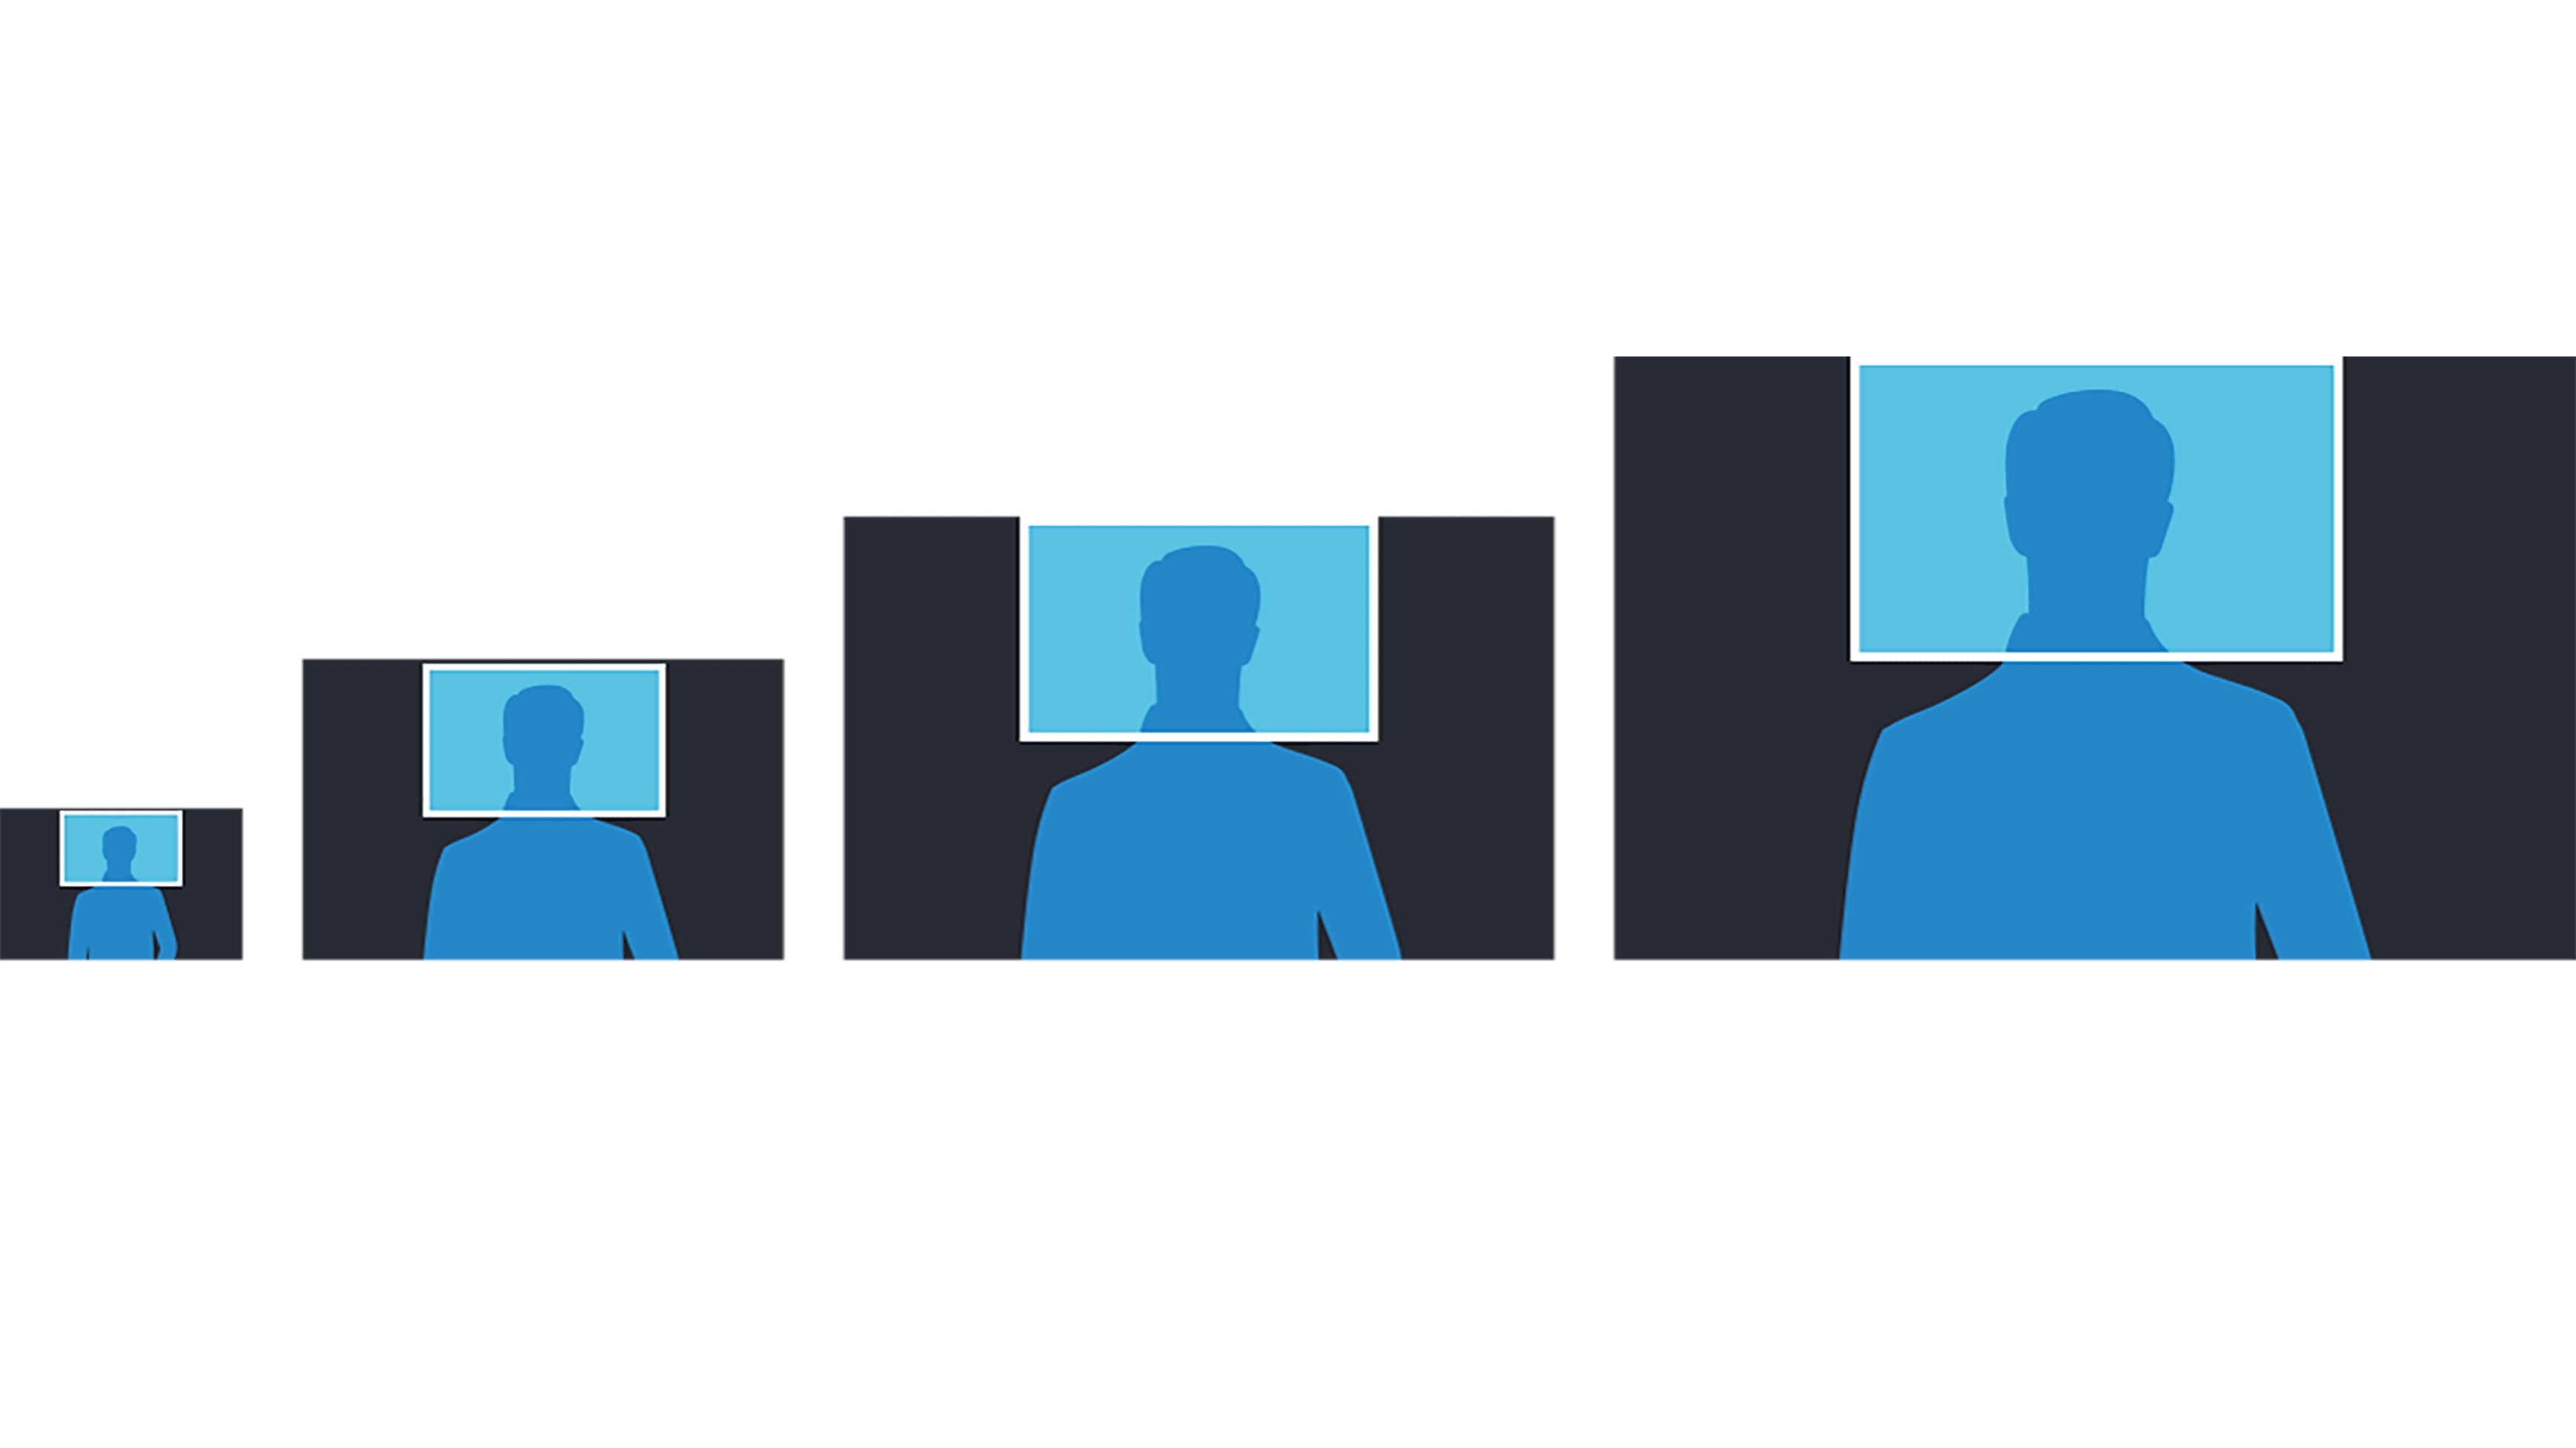  set of silhouettes of a man with a square wrapped around his head in the form of diagram with the text 12.5MP, 50MP, 108MP, 200MP in the order of size 